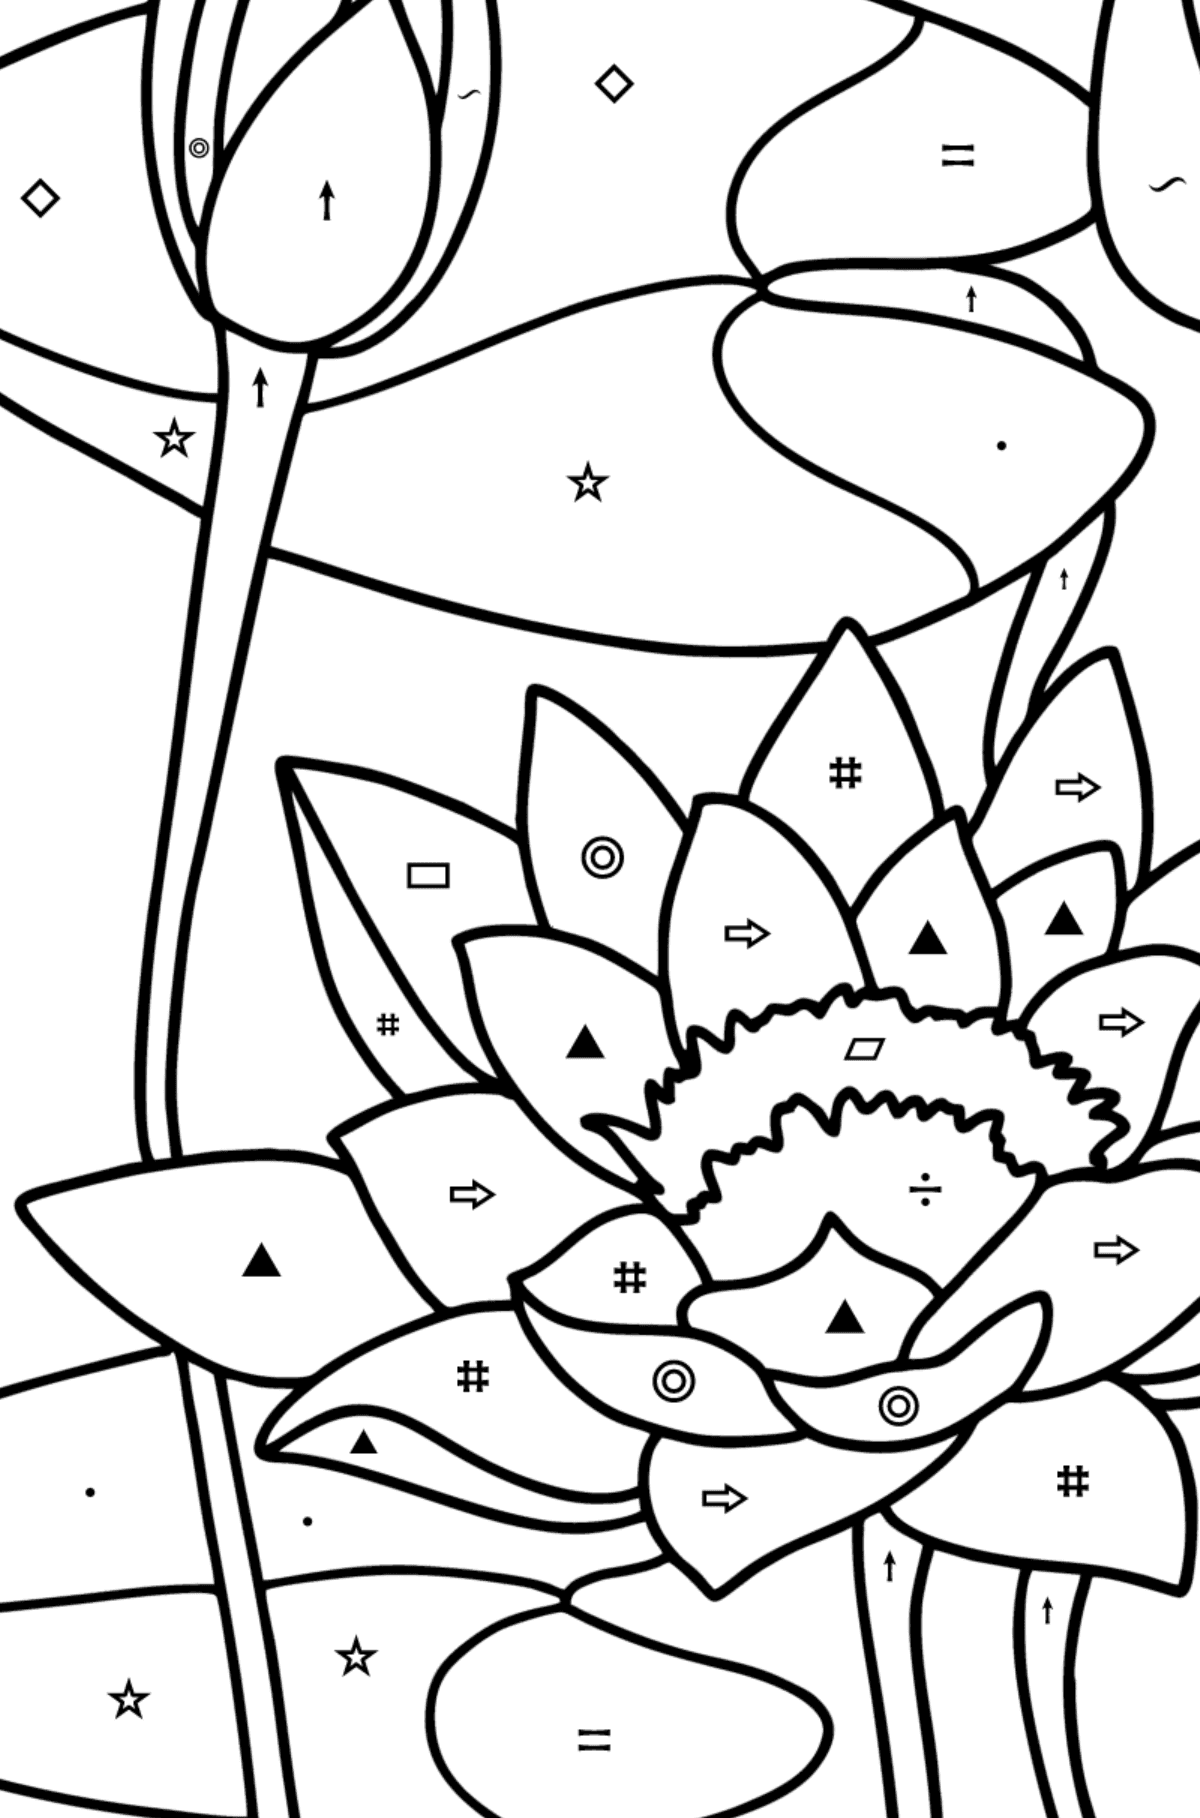 Water lily coloring page - Coloring by Symbols and Geometric Shapes for Kids